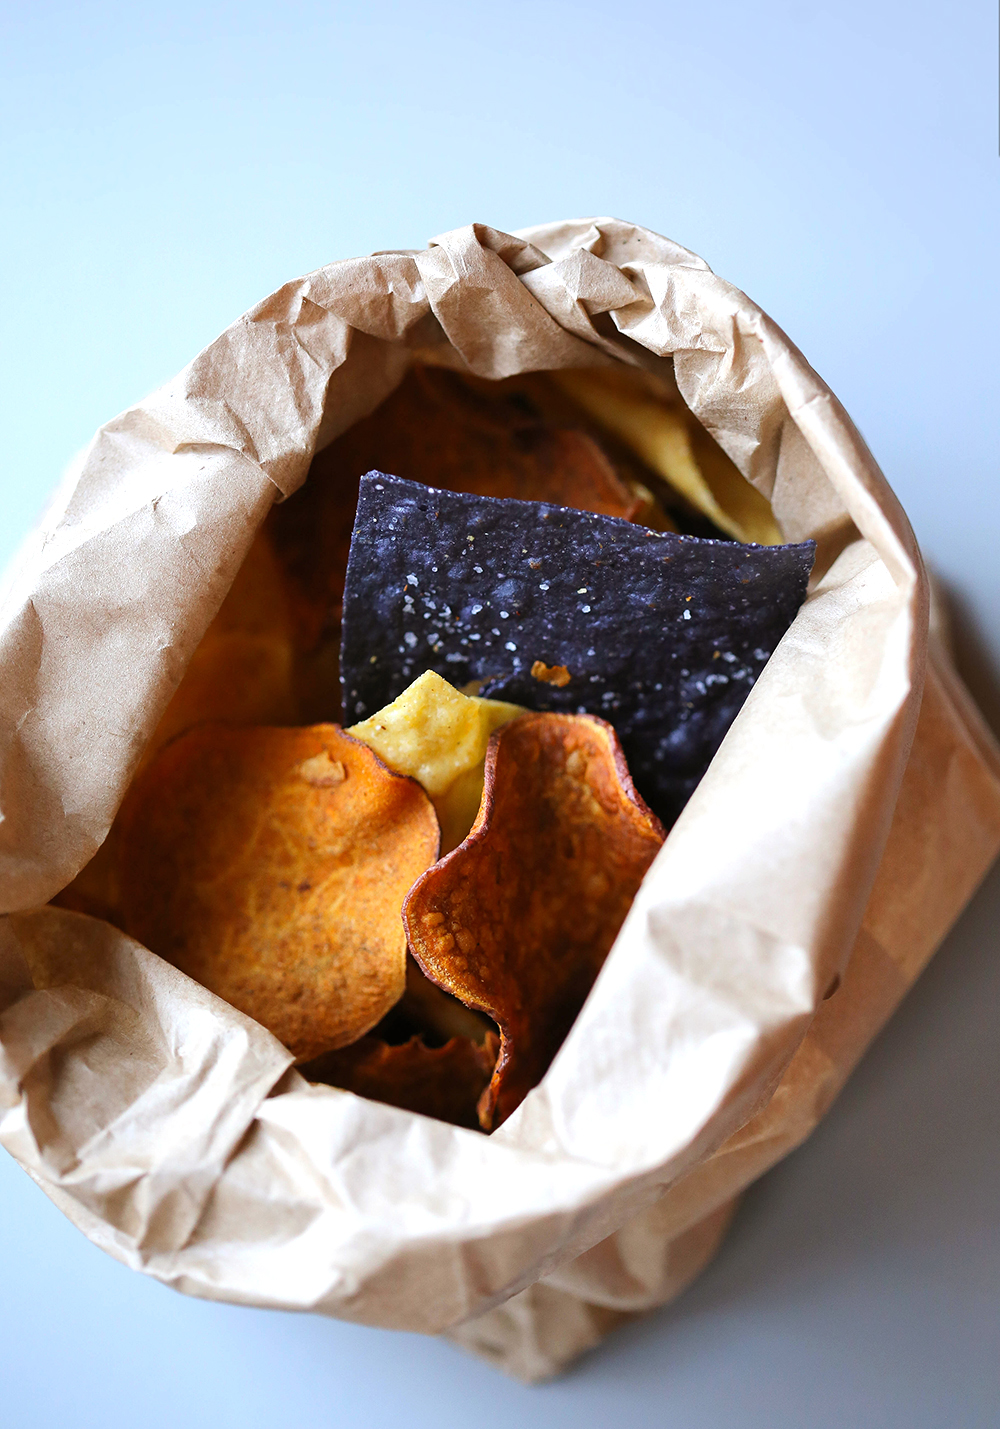 A bag of house chips. Photo by Catherine Downes.